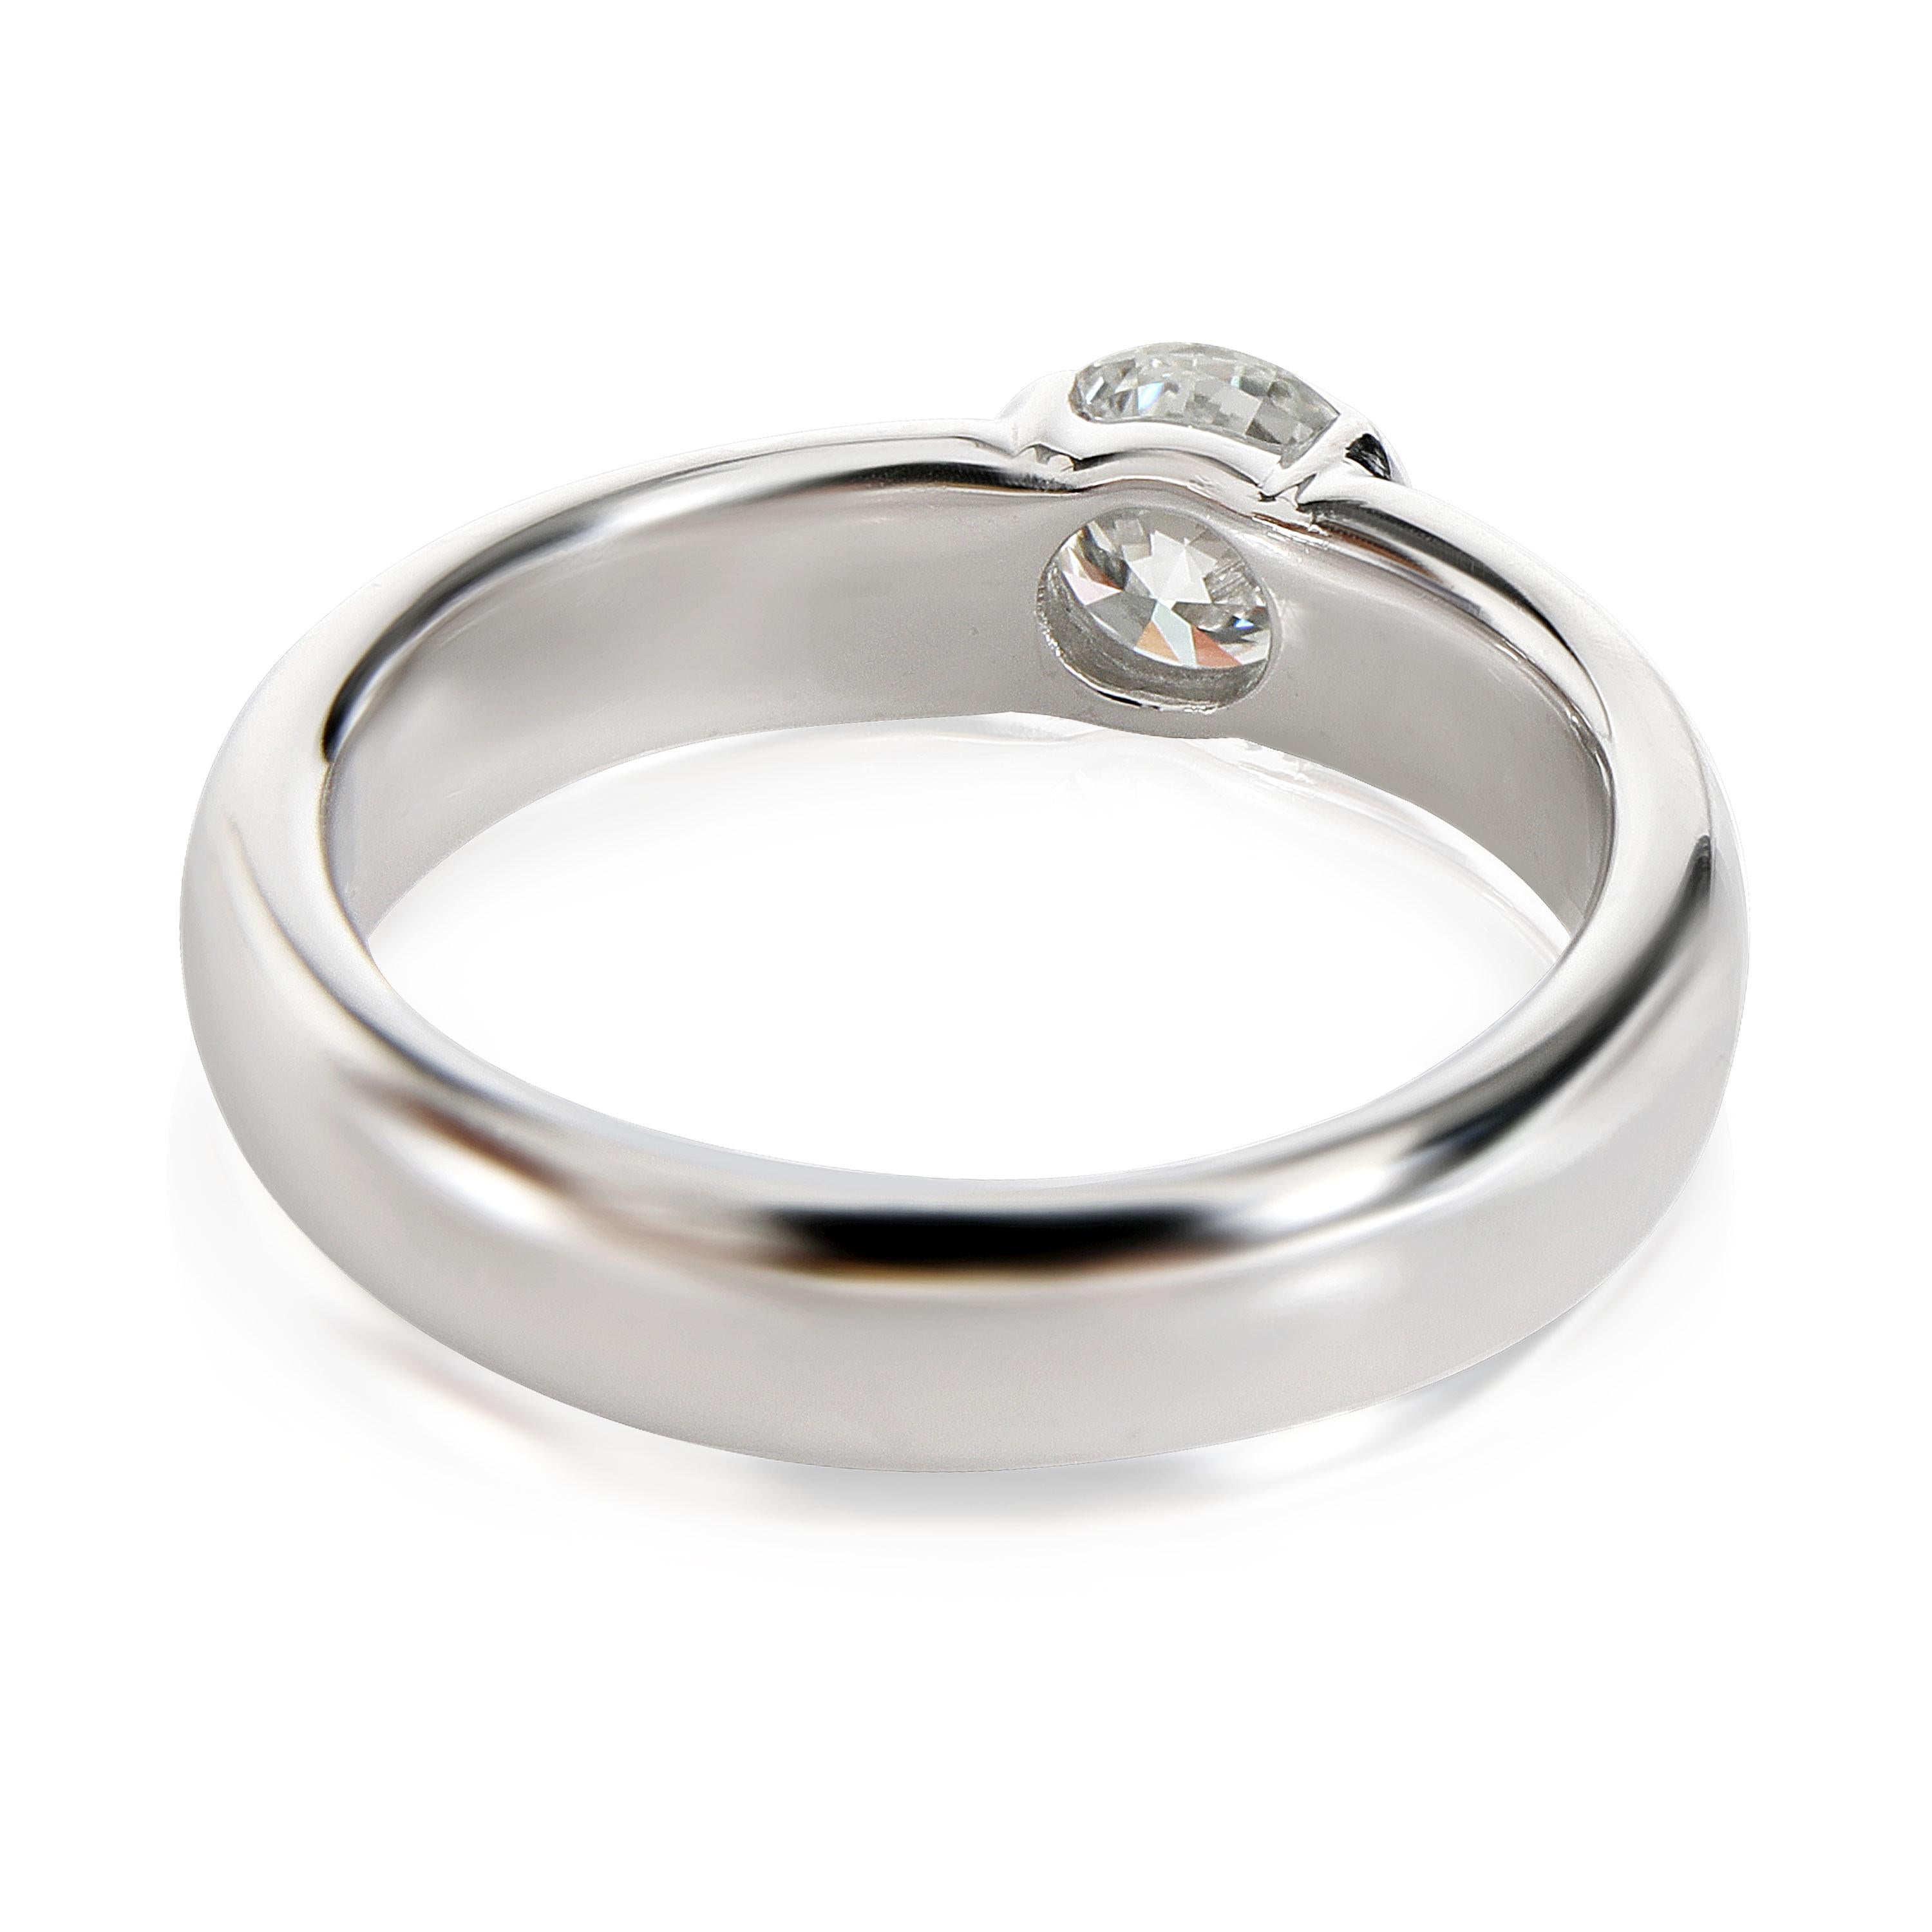 Tiffany & Co. Etoile Diamond Engagement Ring in Platinum G VS1 0.58 CTW

PRIMARY DETAILS
SKU: 112092
Listing Title: Tiffany & Co. Etoile Diamond Engagement Ring in Platinum G VS1 0.58 CTW
Condition Description: Retails for 6,500 USD. In excellent